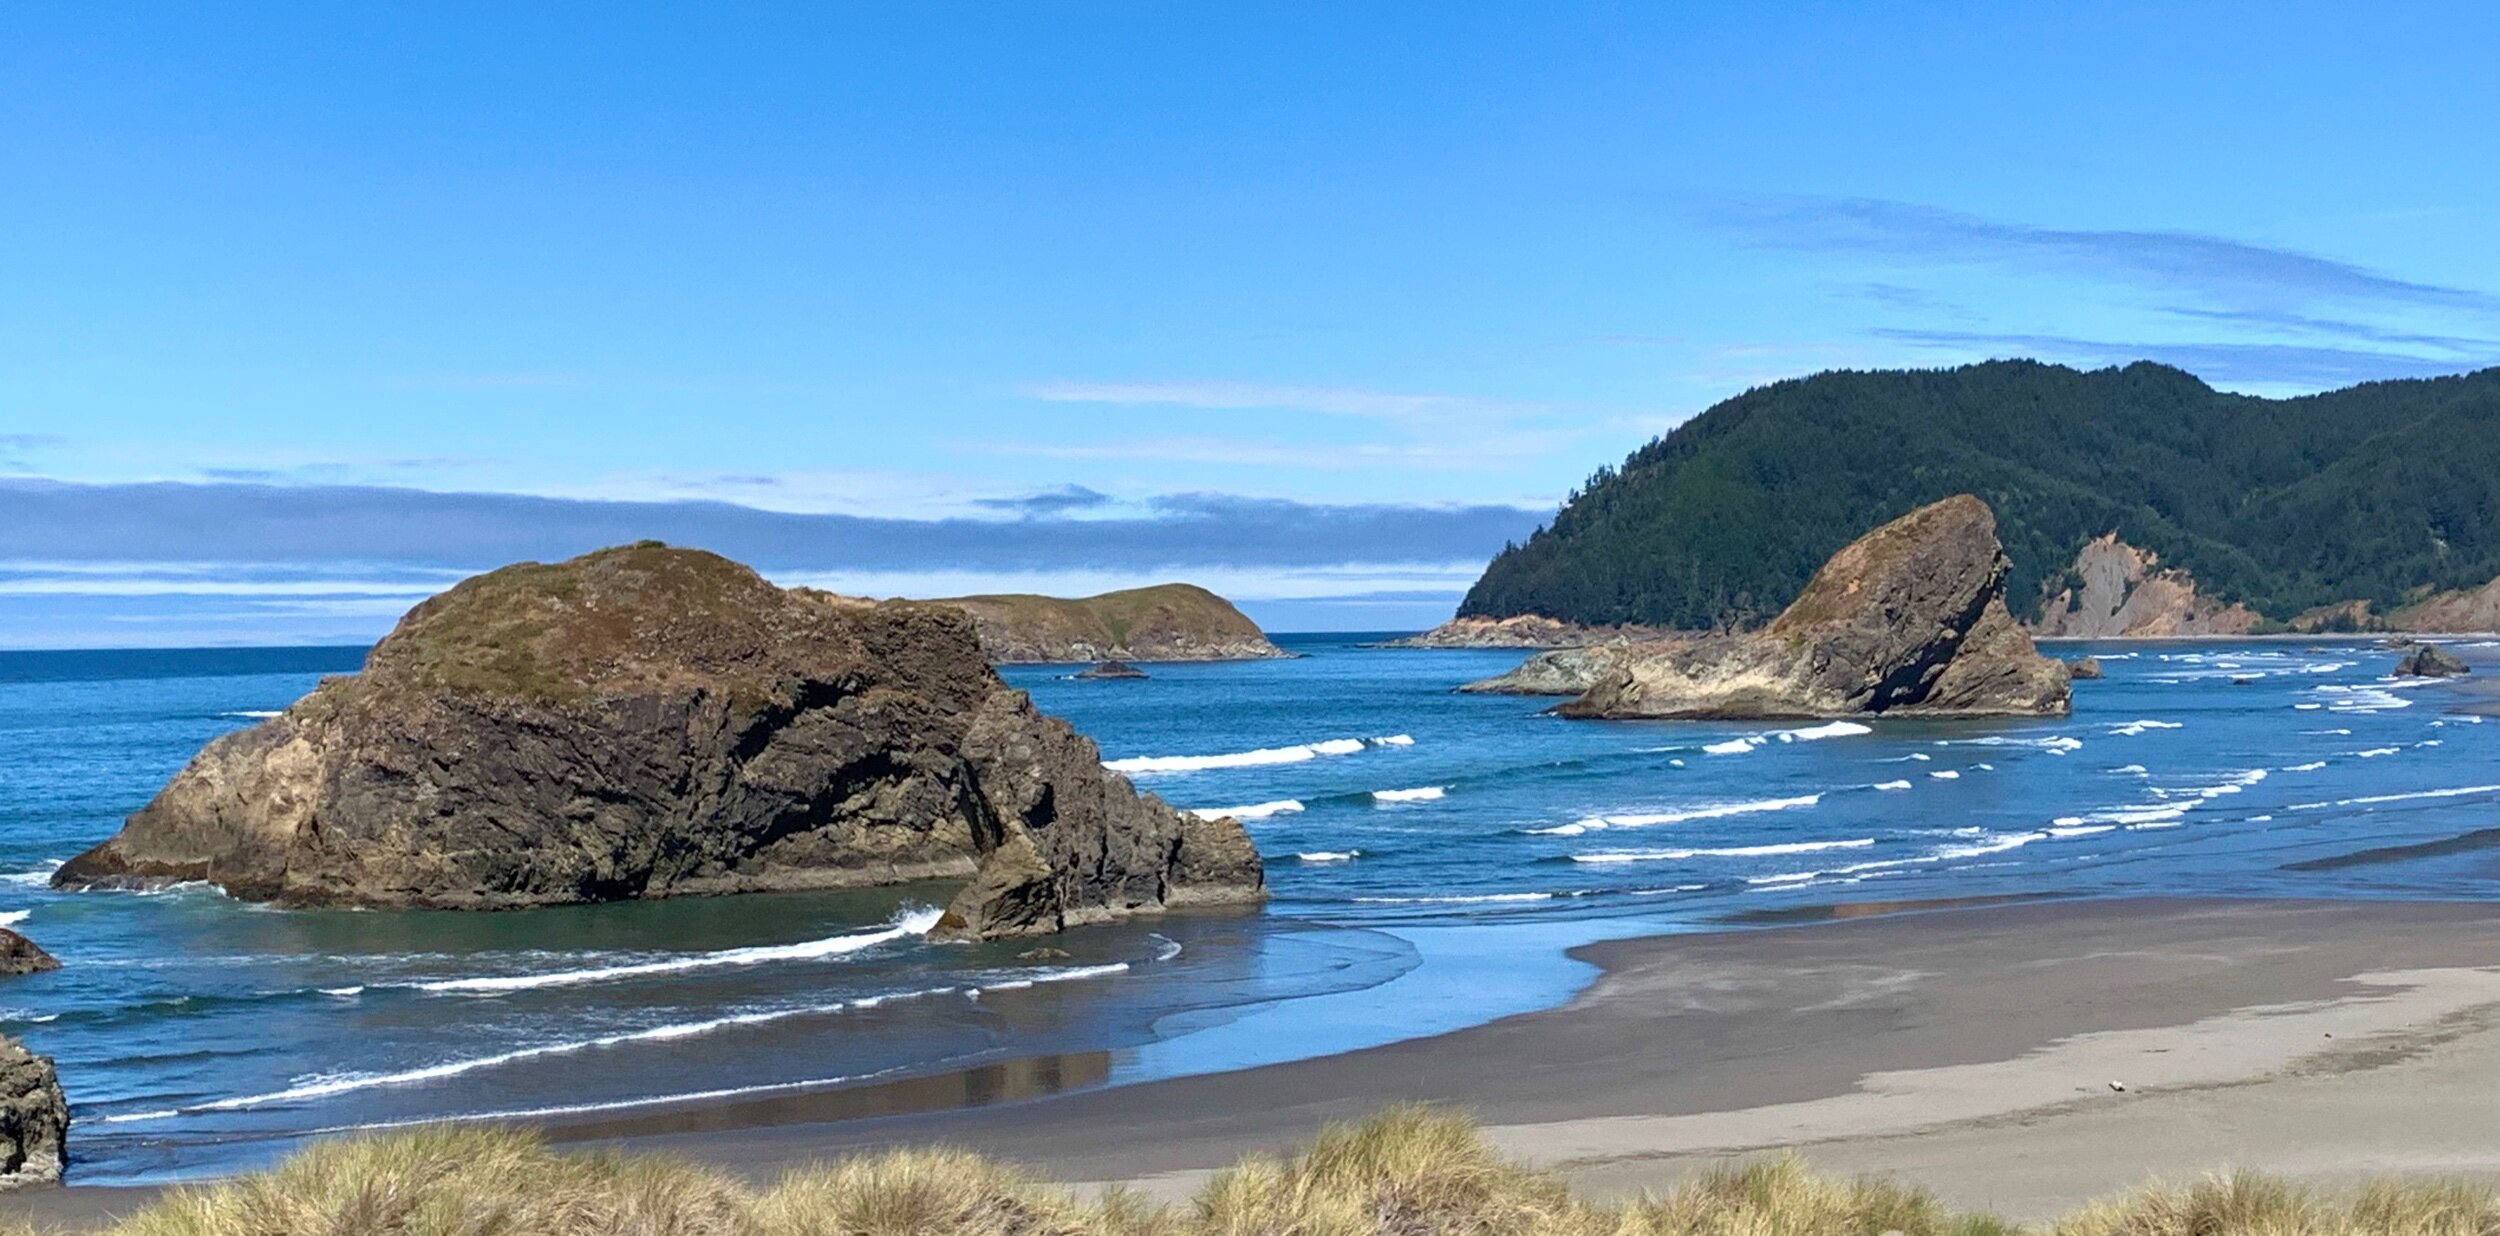   Gold Beach  is located on the Pacific coast where the  Rogue River  feeds into the ocean, a couple of hours north of the California state line. This beach/river town was named so in the 1850s when hundreds of mines at the mouth of the river rendere